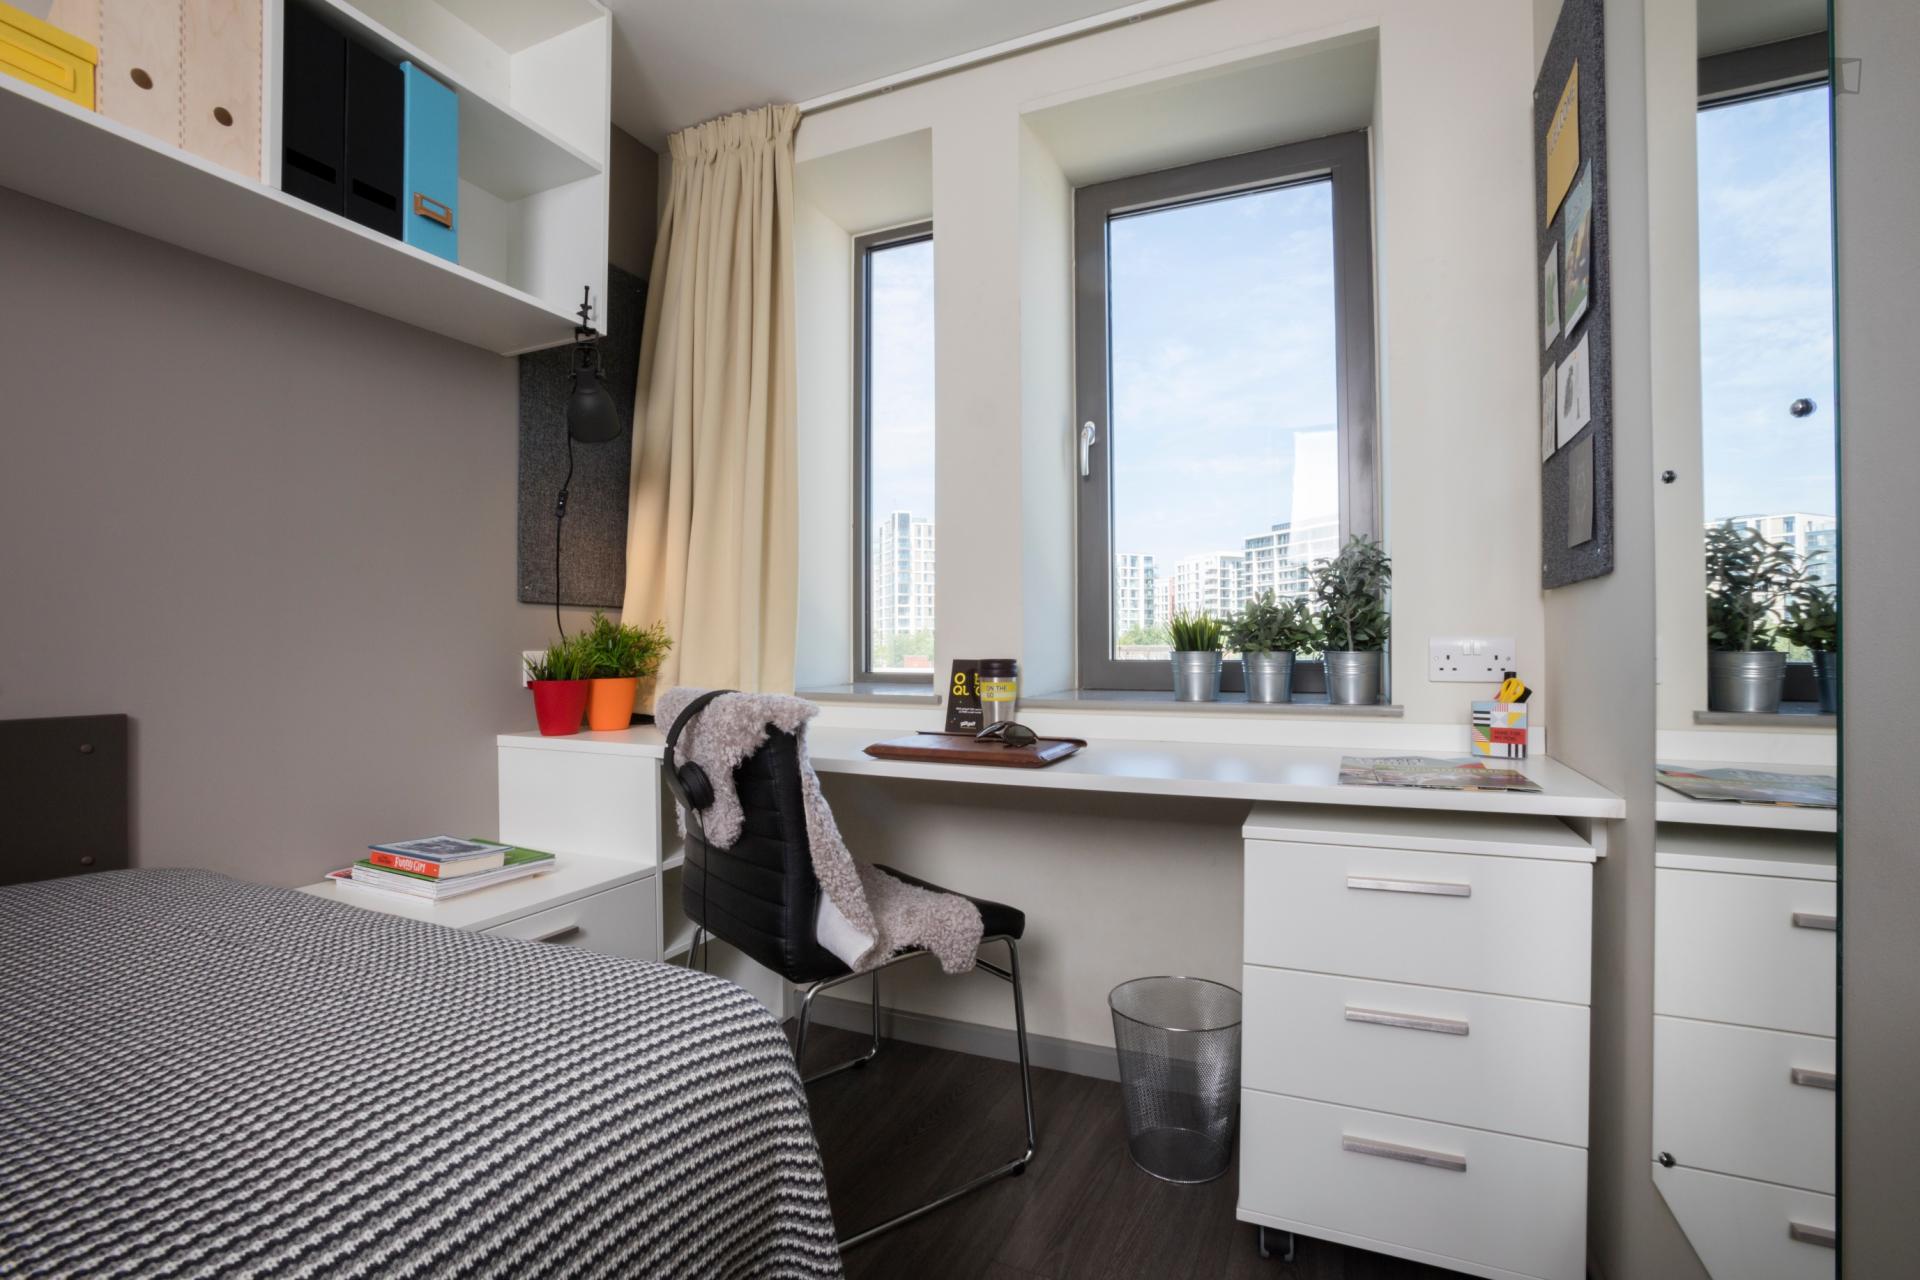 Way - Equipped studio for expats in London